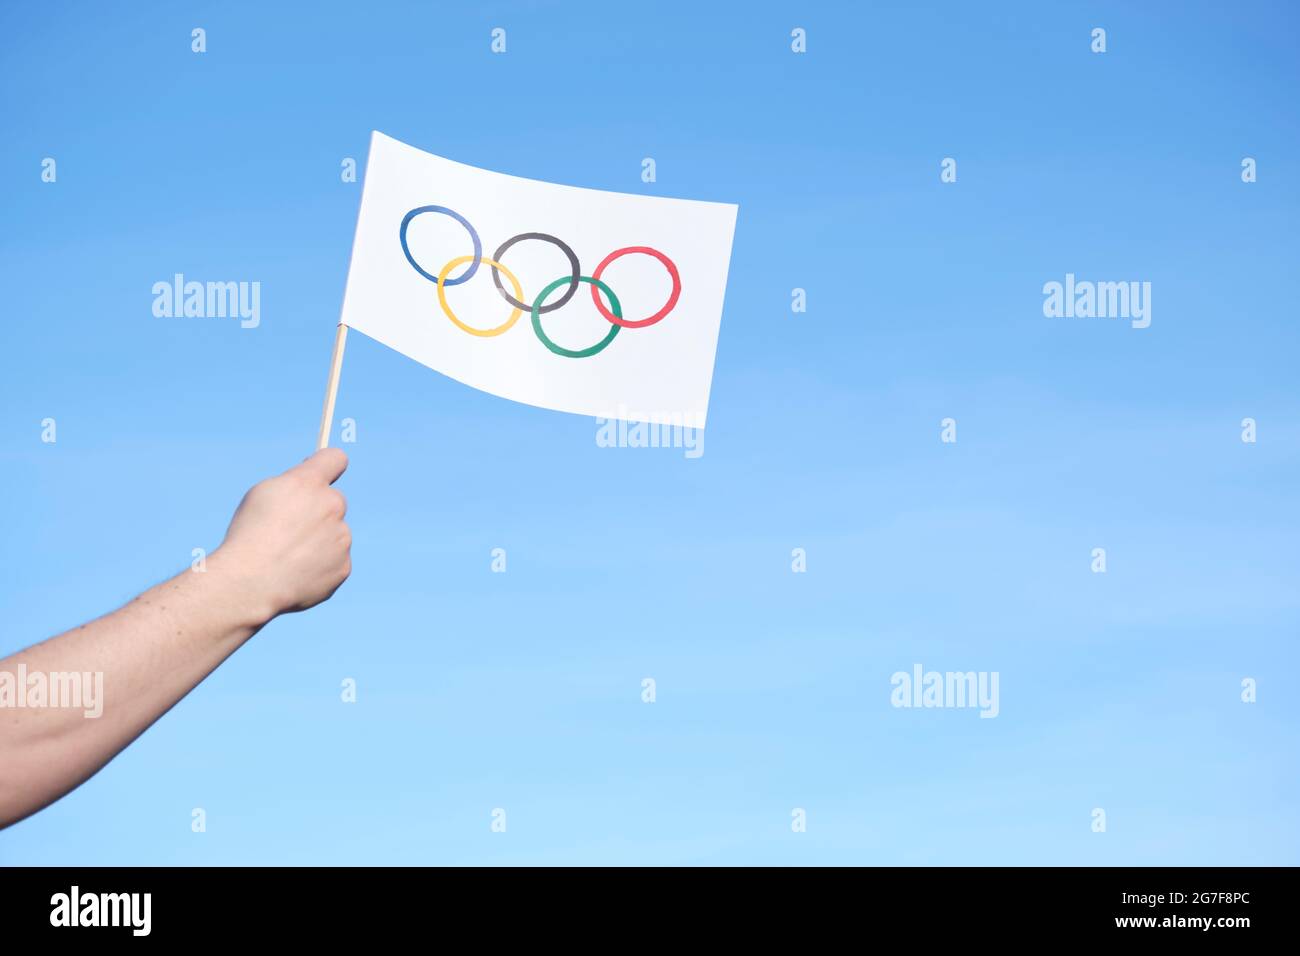 Hand holding a handmade Olympic Games flag outdoors against a clear sky on a sunny day. Image with copy space. Stock Photo